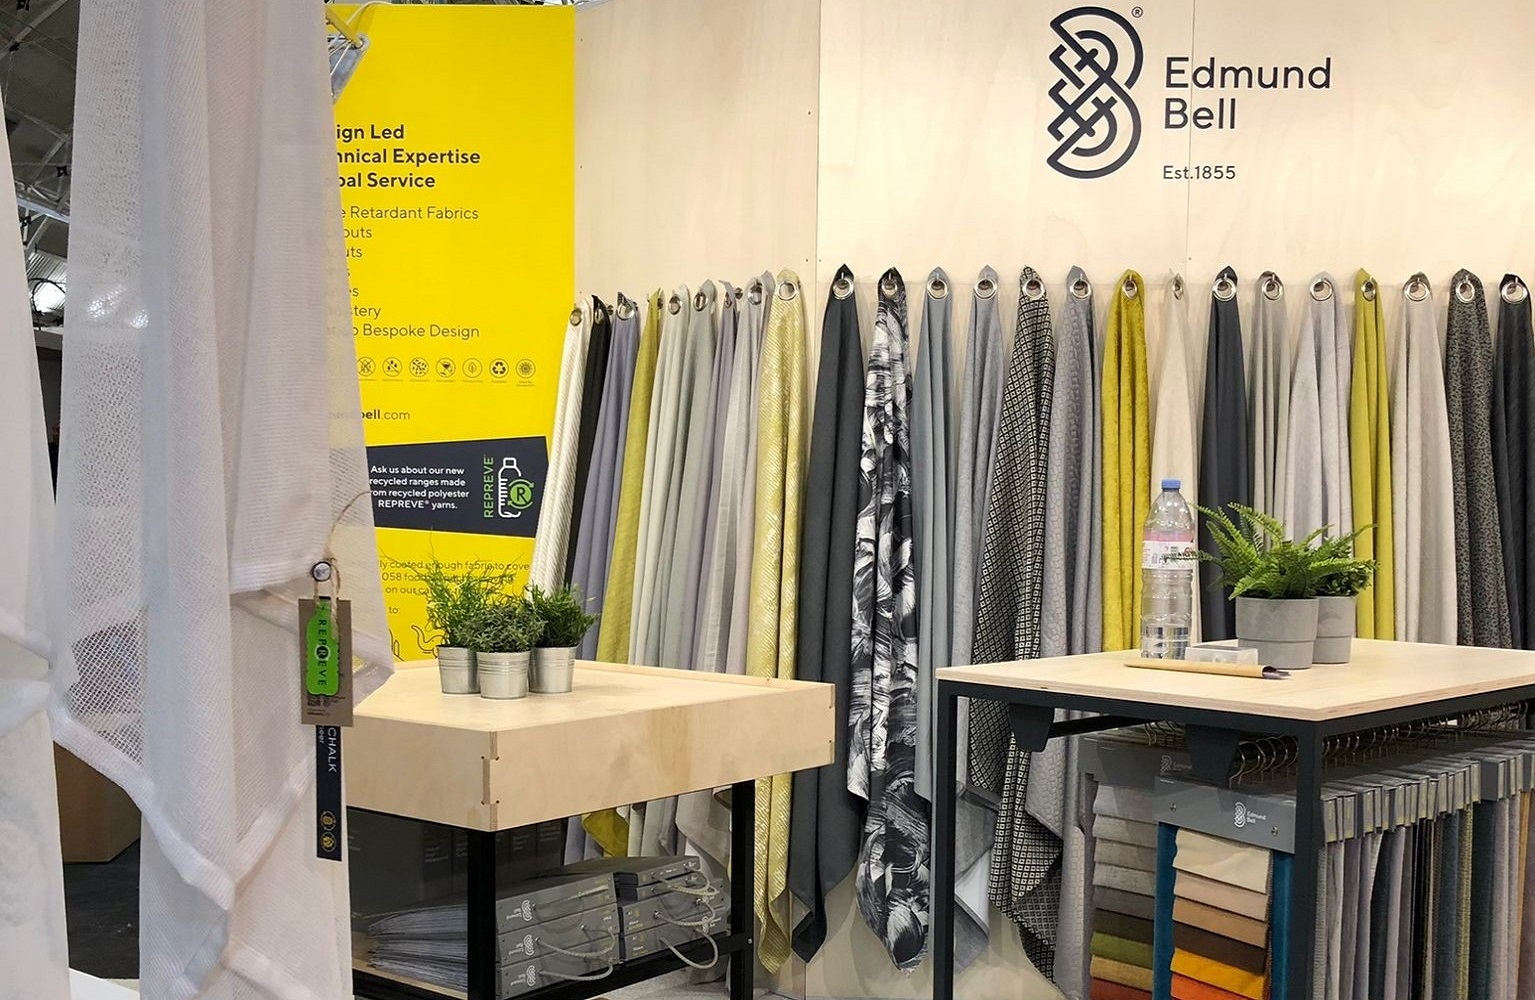 Edmund Bell stand at HIX in London showcasing recycled fabric range